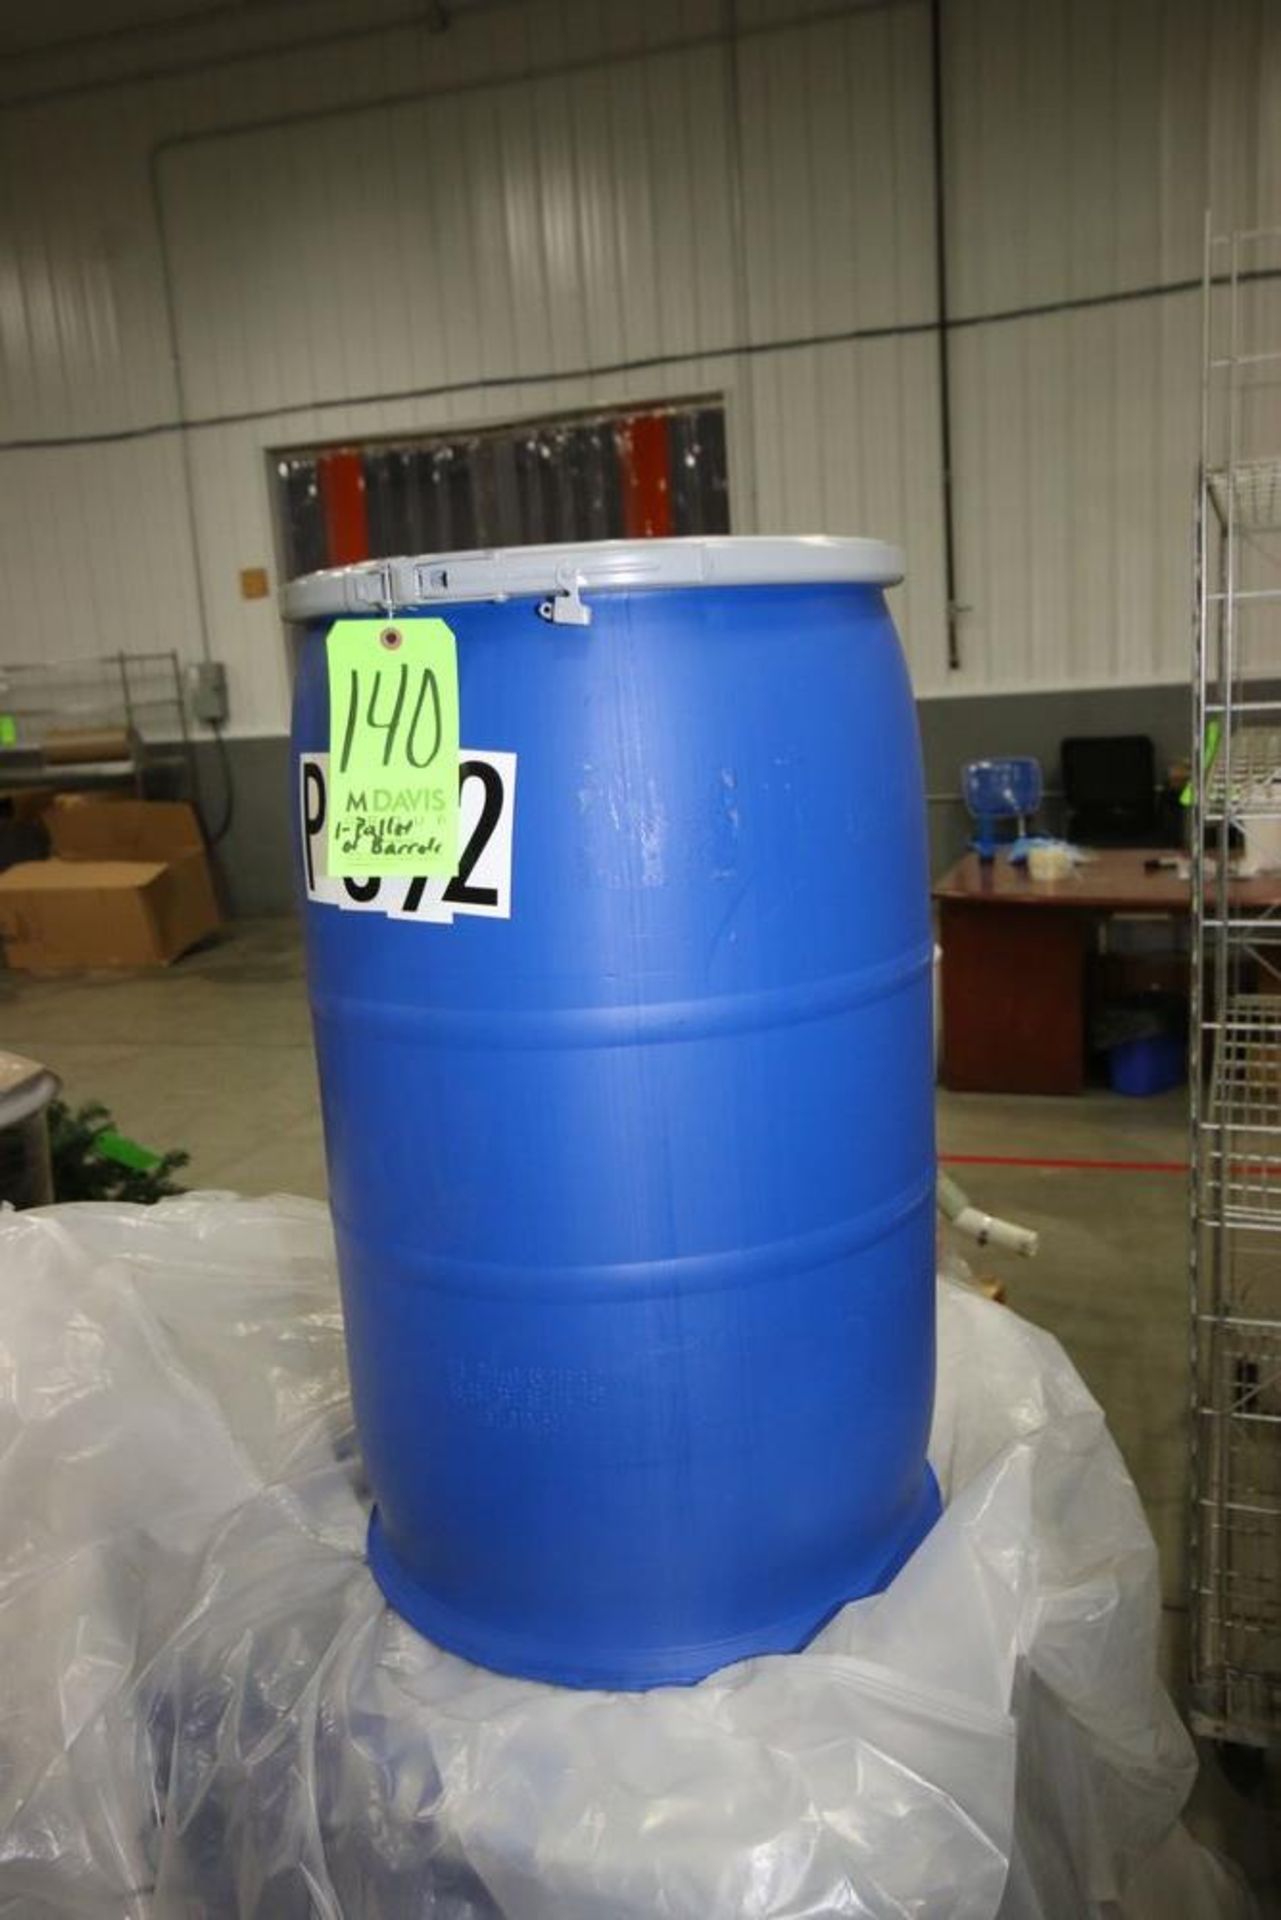 NEW Plastic Barrels with Lids, Overall Dims.: Aprox. 30" L x 17" Dia. (LOCATED IN BEAVER FALLS, - Image 3 of 3